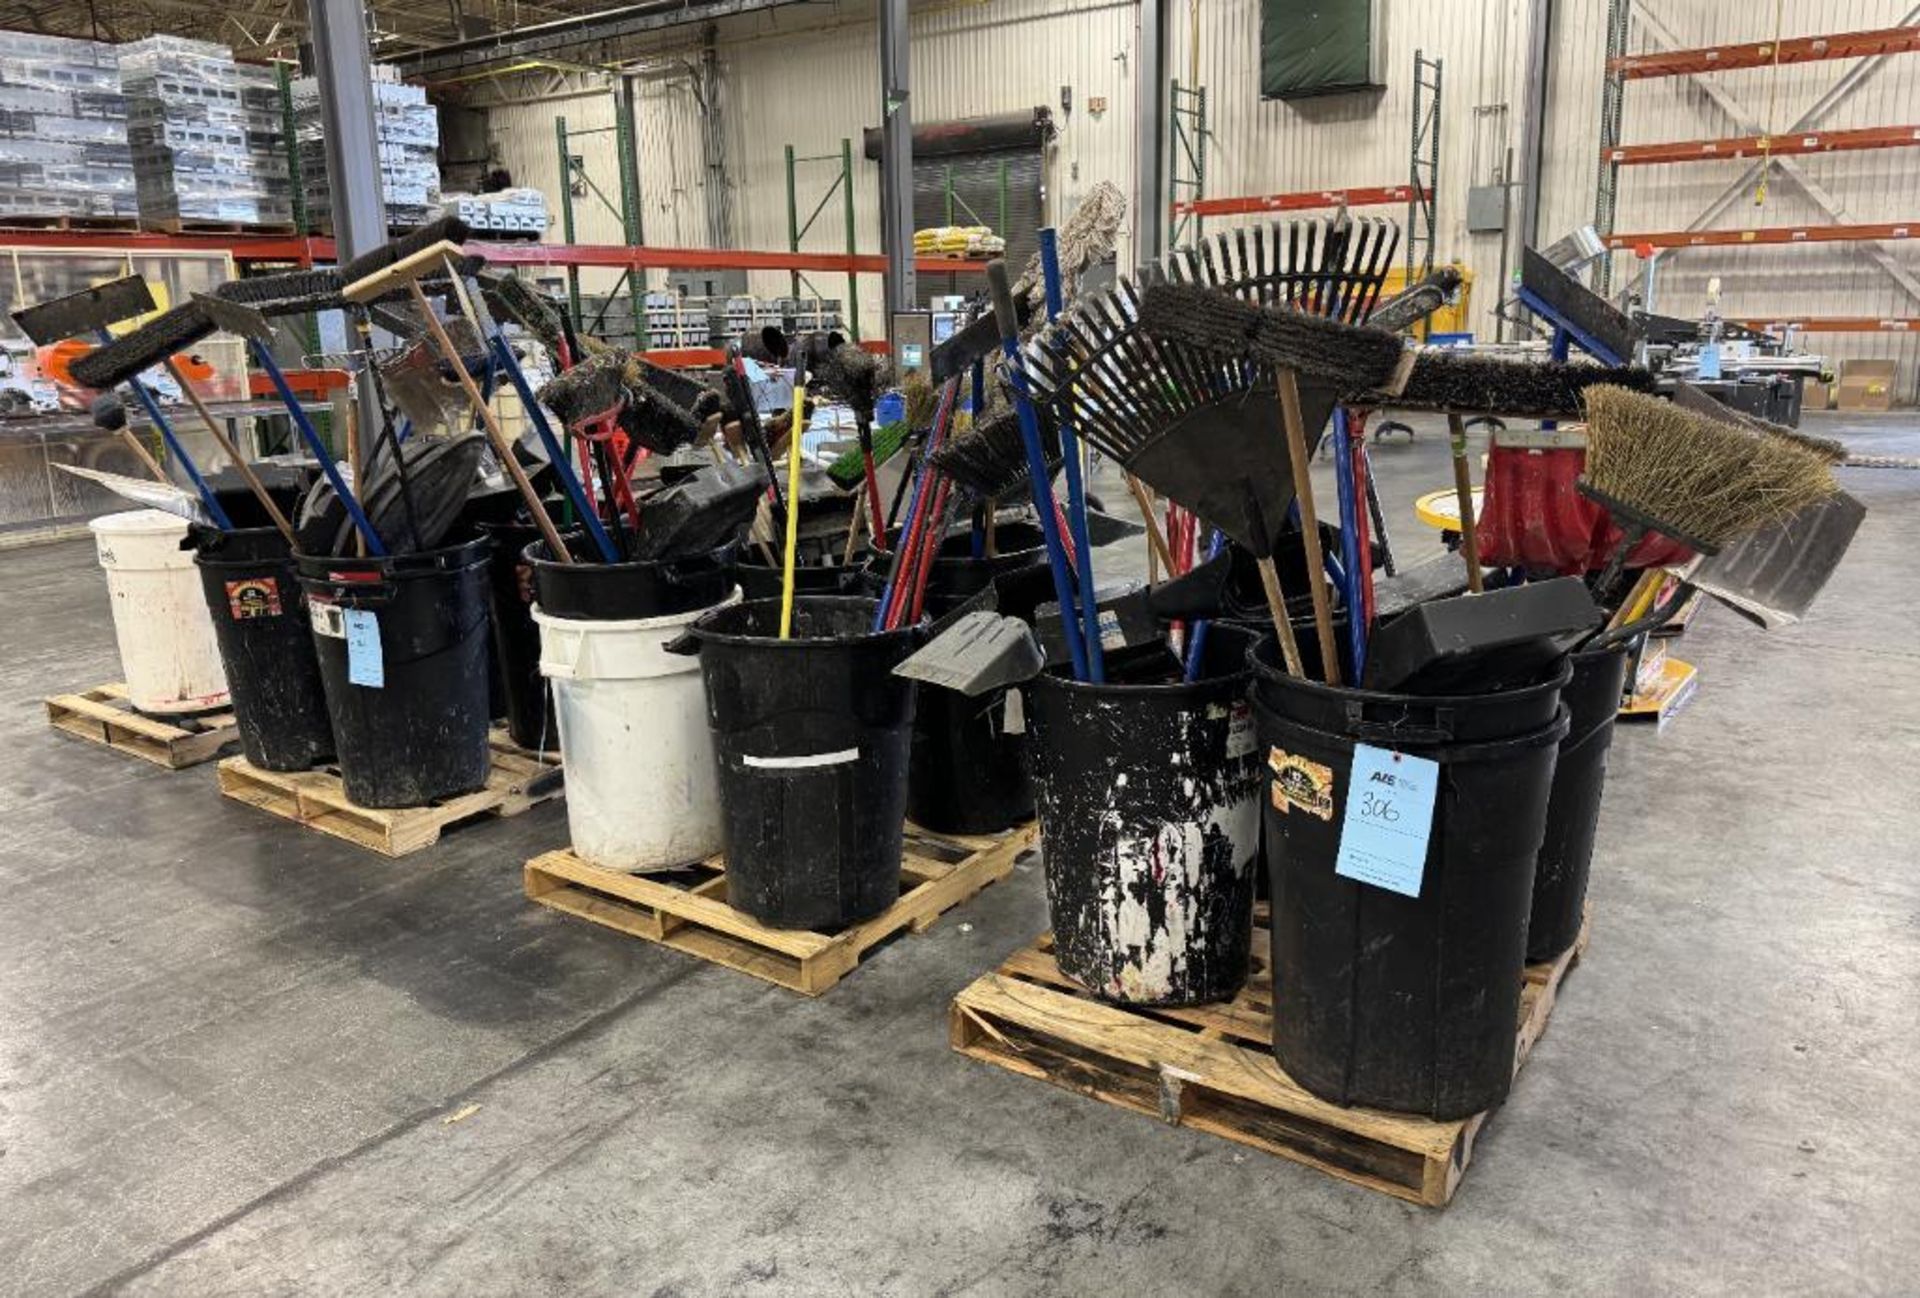 Lot Consisting Of: Misc. garbage cans, Mops, brooms, rakes, shovels and dust pans.